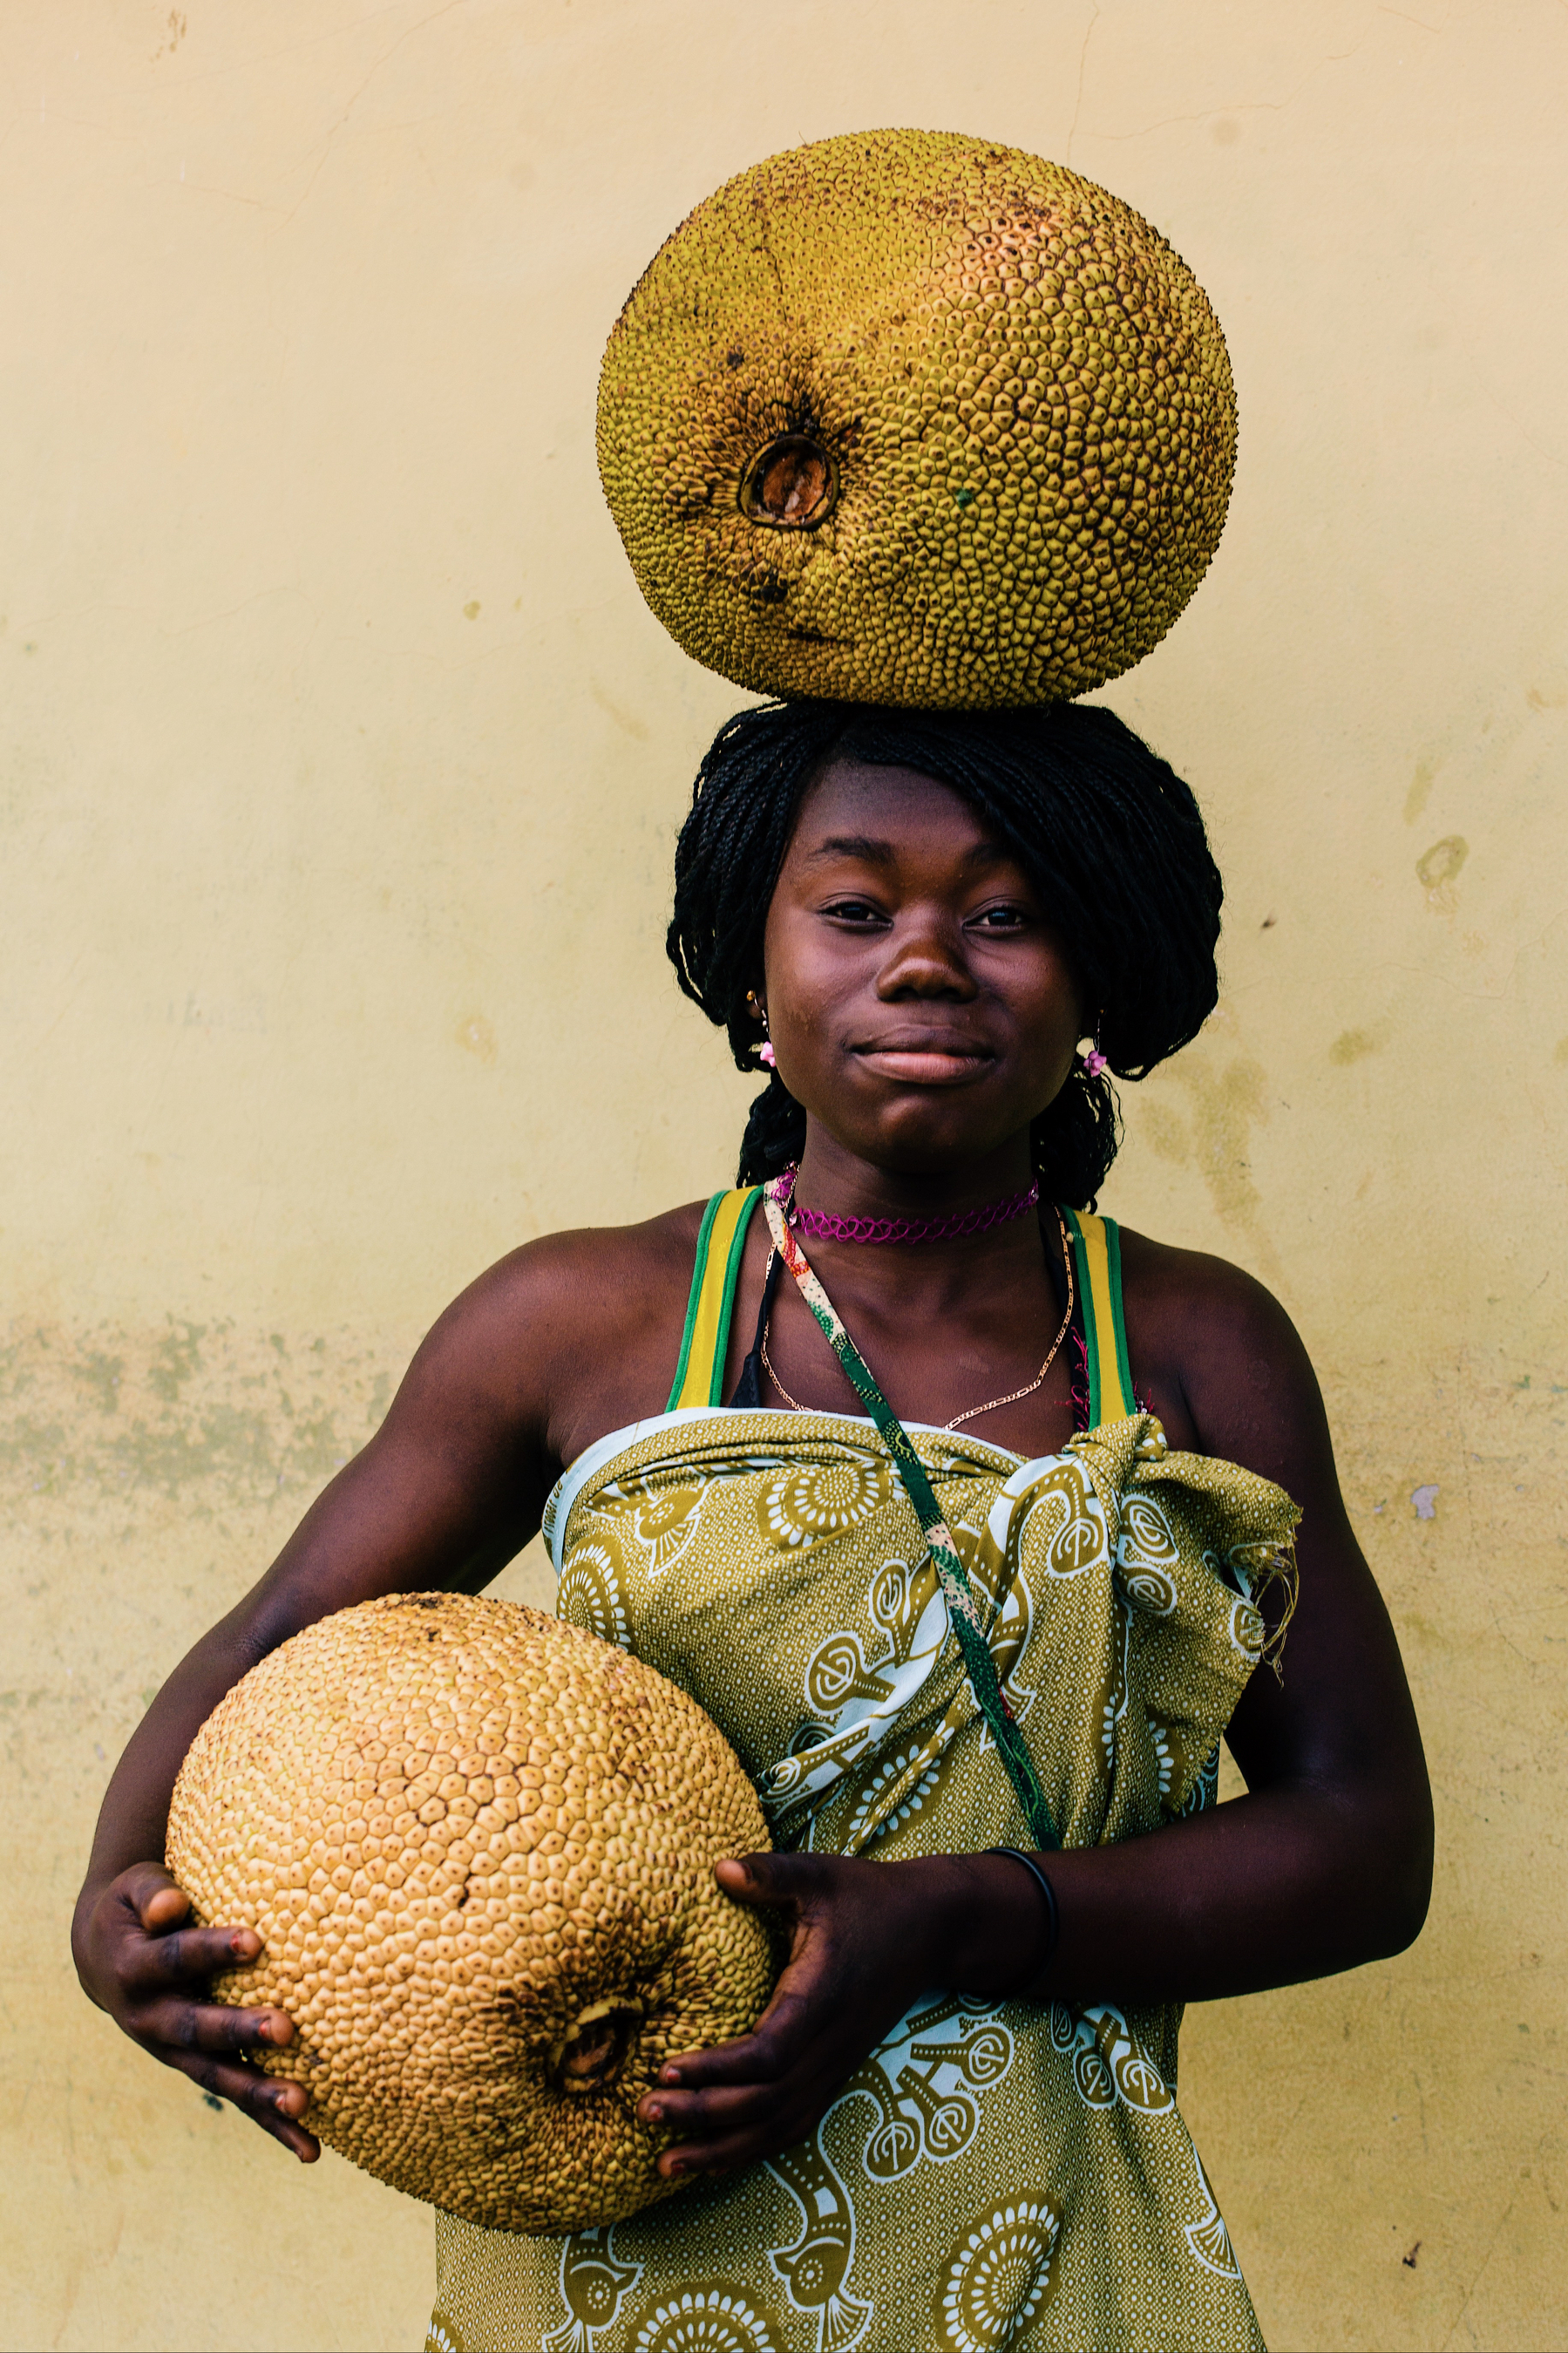 A woman carries a jackfruit on her head, and holds another one on her arms